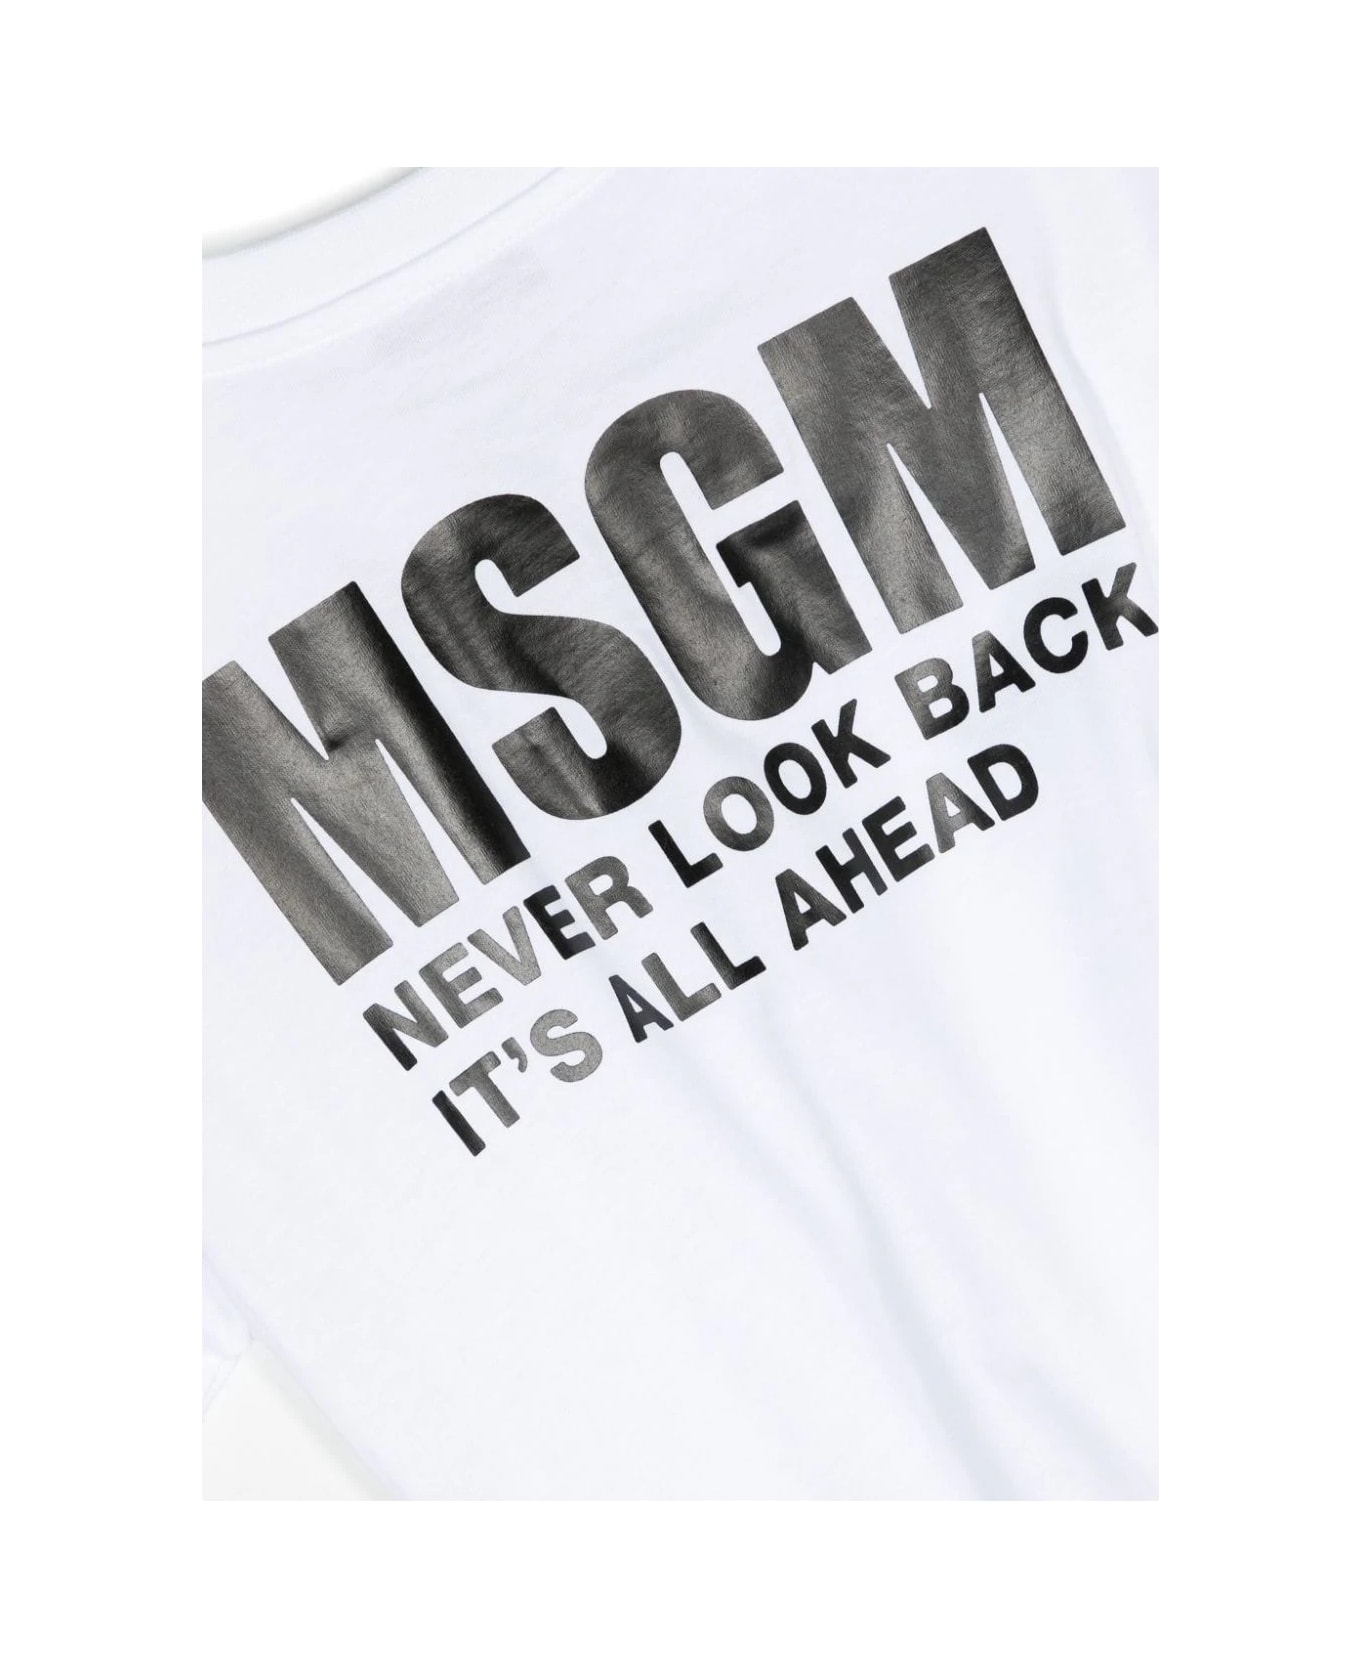 MSGM White T-shirt With Front And Back Logo - Bianco Tシャツ＆ポロシャツ